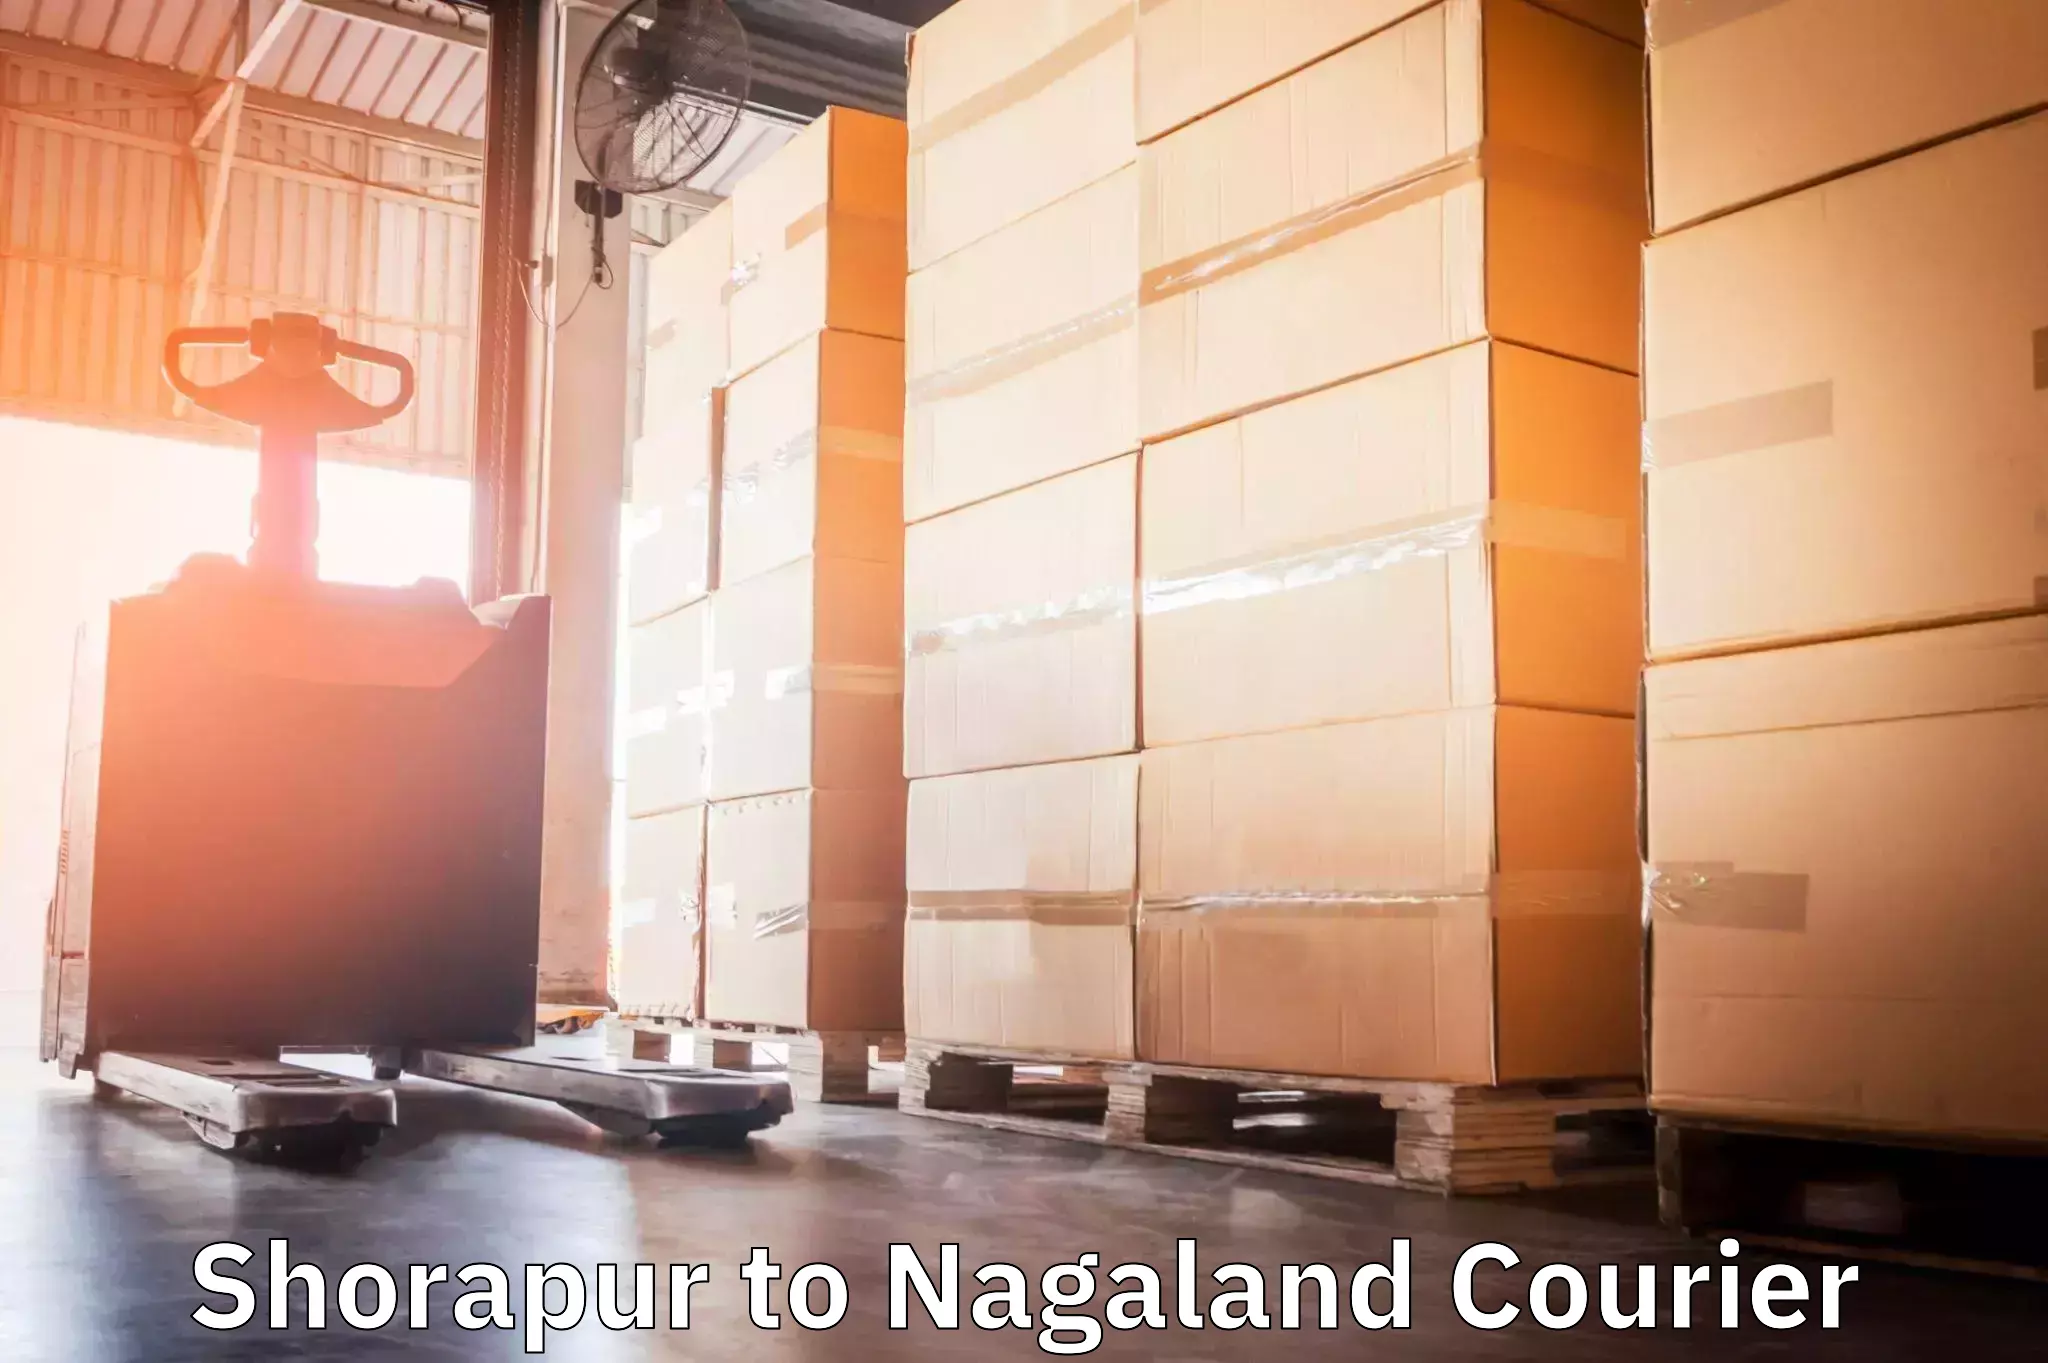 Local delivery service Shorapur to Nagaland